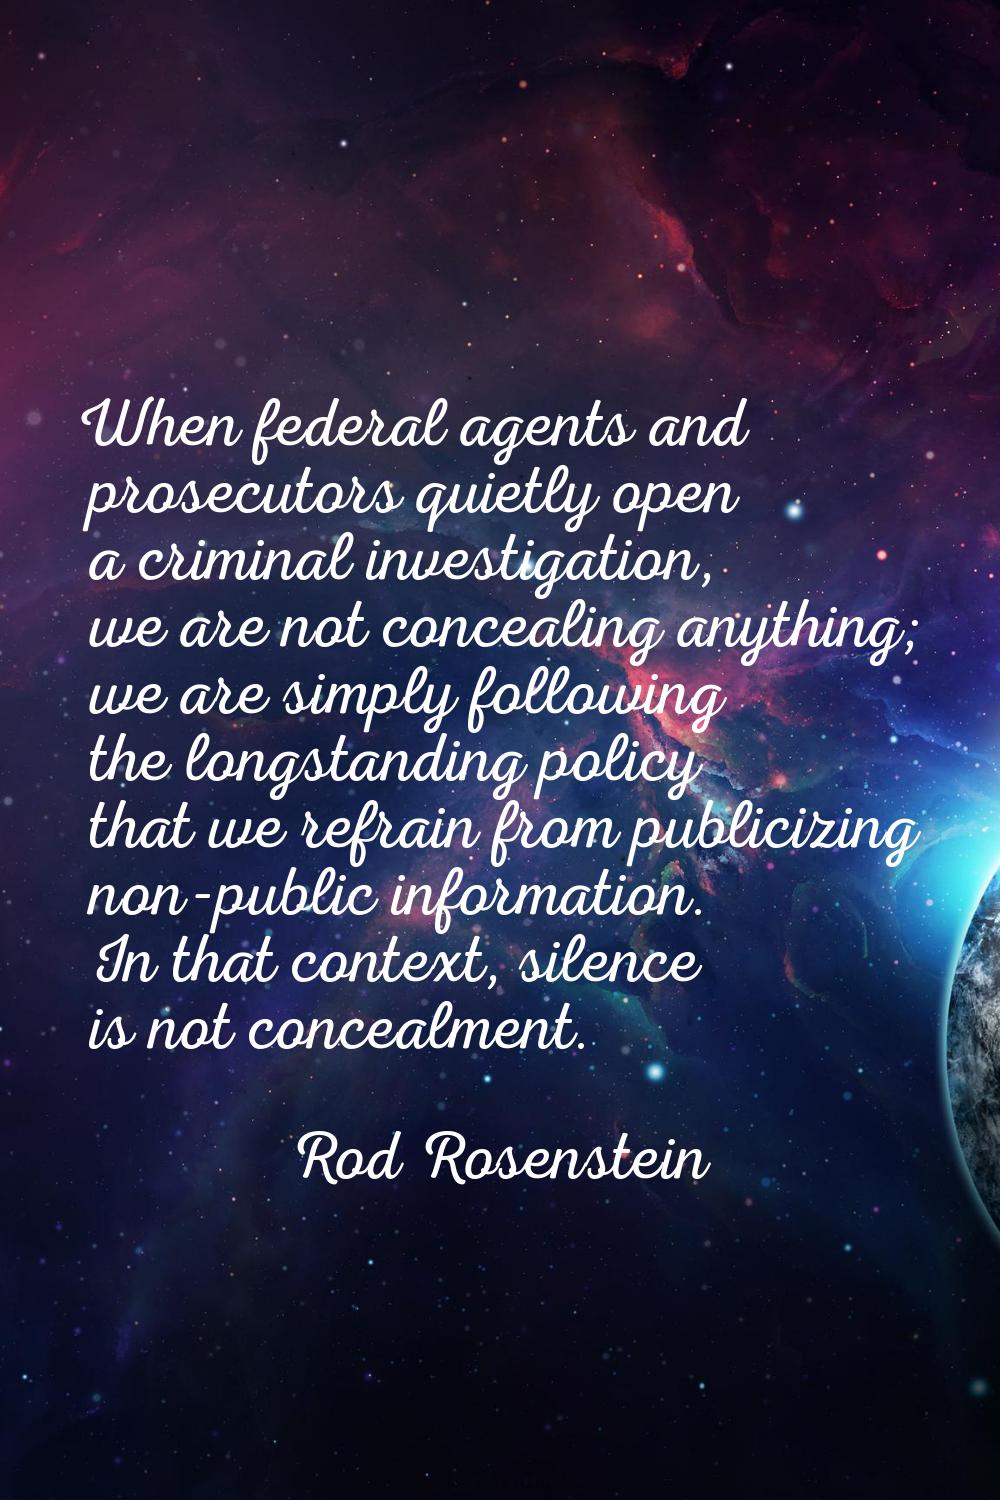 When federal agents and prosecutors quietly open a criminal investigation, we are not concealing an